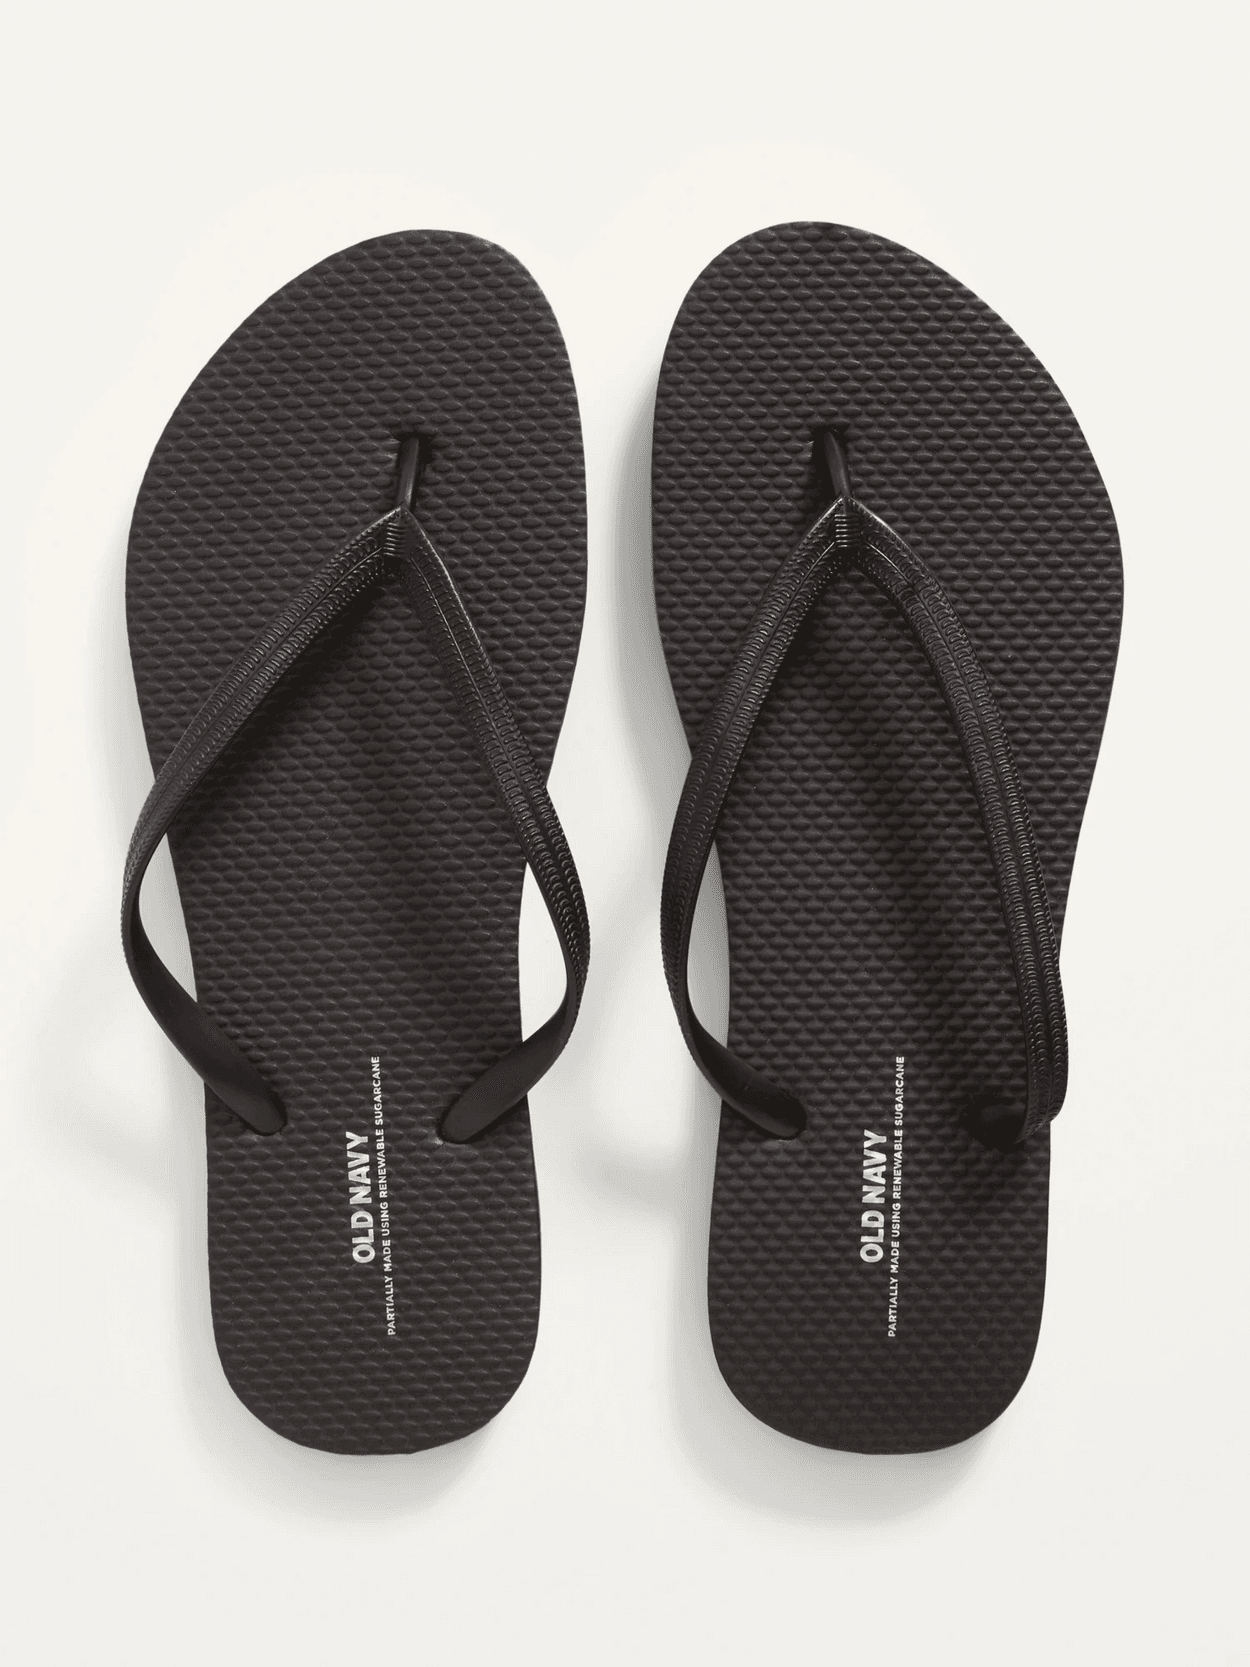 Old Navy Flip-Flop Sandals for Women Partially Plant-Based